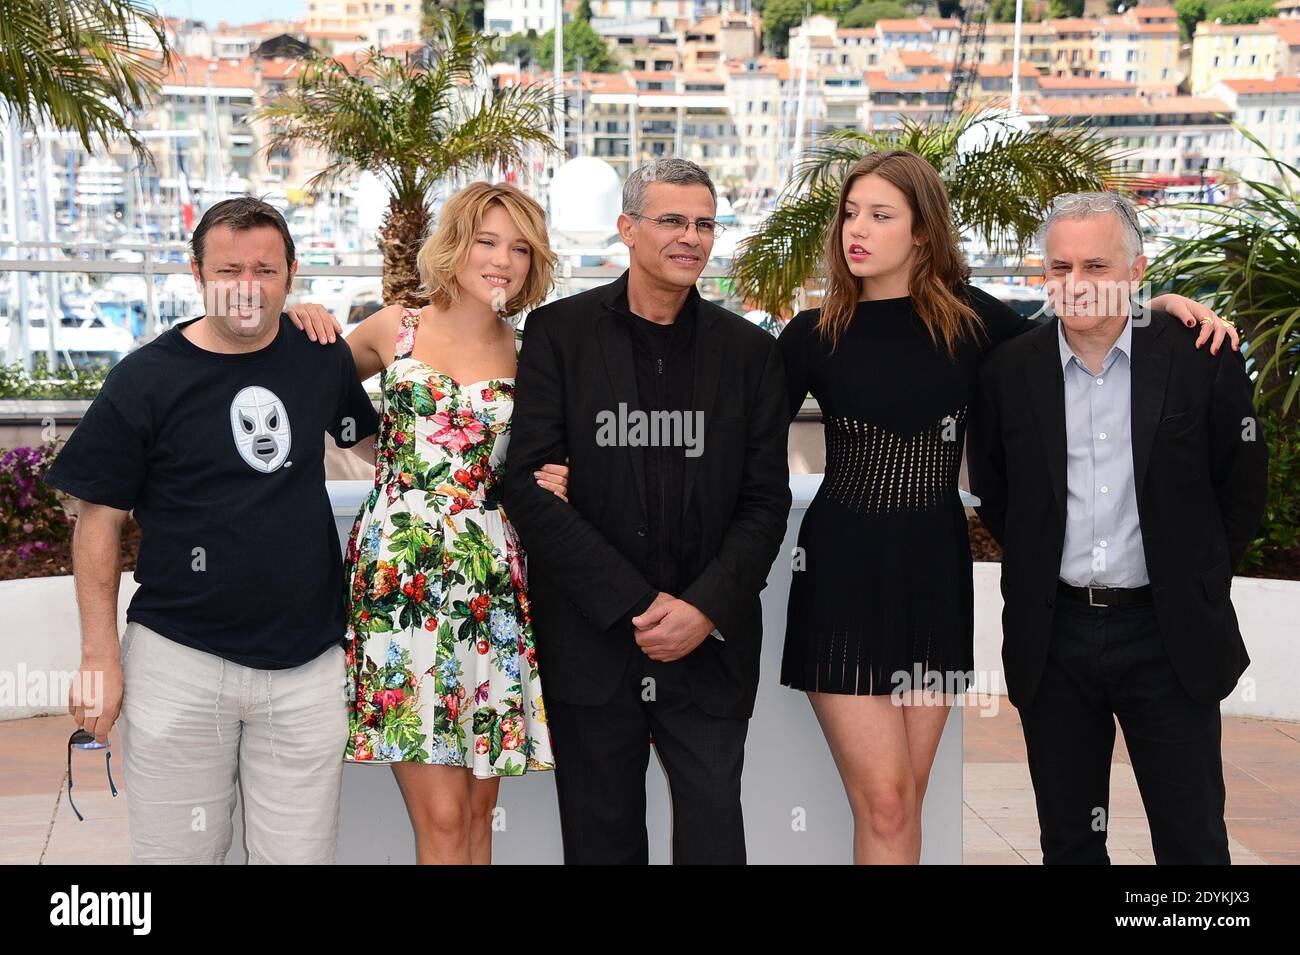 Director Abdellatif Kechiche, Lea Seydoux, Vincent Maraval, Adele Exarchopoulos, Brahim Chioua pose at the photocall for the film La Vie D'Adele held at the Palais Des Festivals as part of the 66th Cannes Film Festival in Cannes, France on May 23, 2013. Photo by Nicolas Briquet/ABACAPRESS.COM Stock Photo